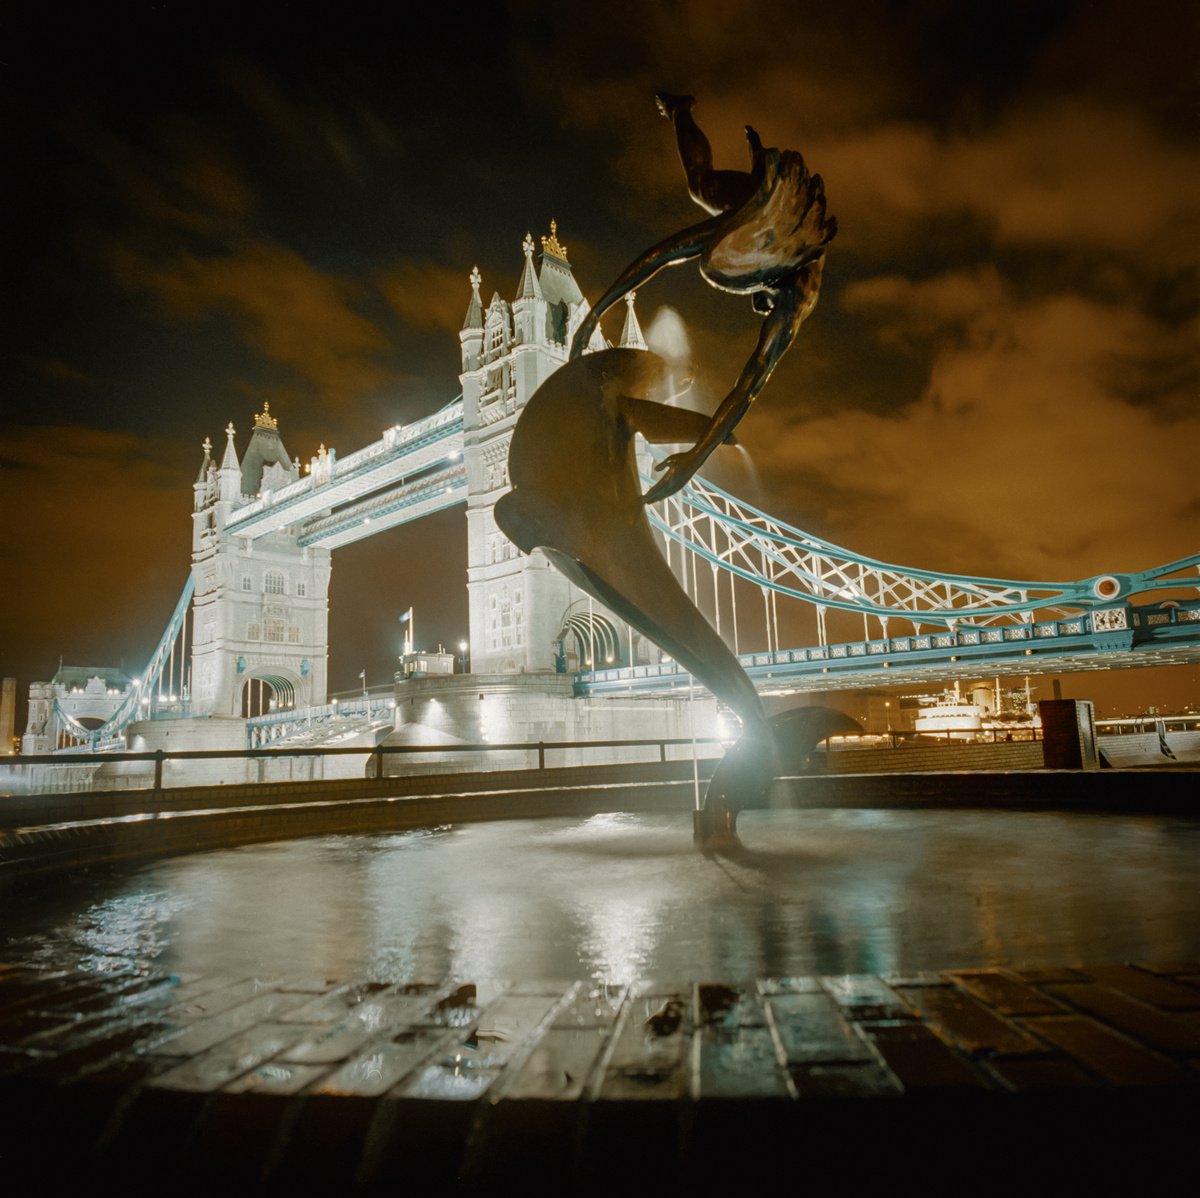 GIRL WITH A DOLPHIN & TOWER BRIDGE LONDON by Robbert Frank Hagens